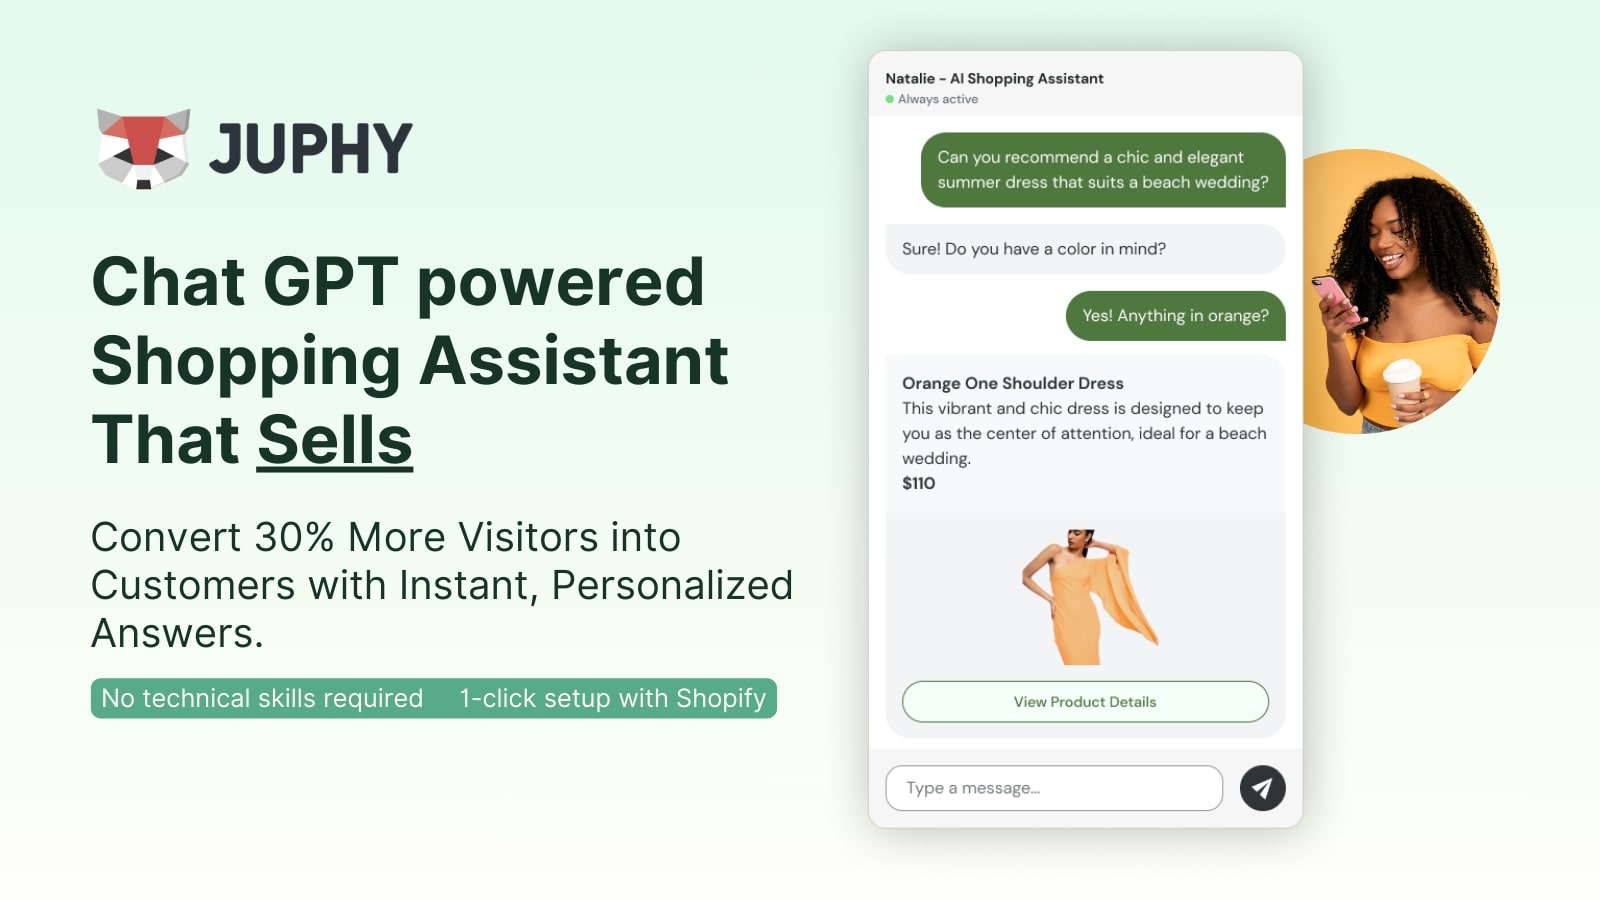 Juphy's AI Shopping Assistant. This ChatGPT-powered chatbot offers a one-click setup, creating personalized shopping journeys, providing 24/7 customer support, and seamlessly integrating with social media all to increase your sales by up to 5X.